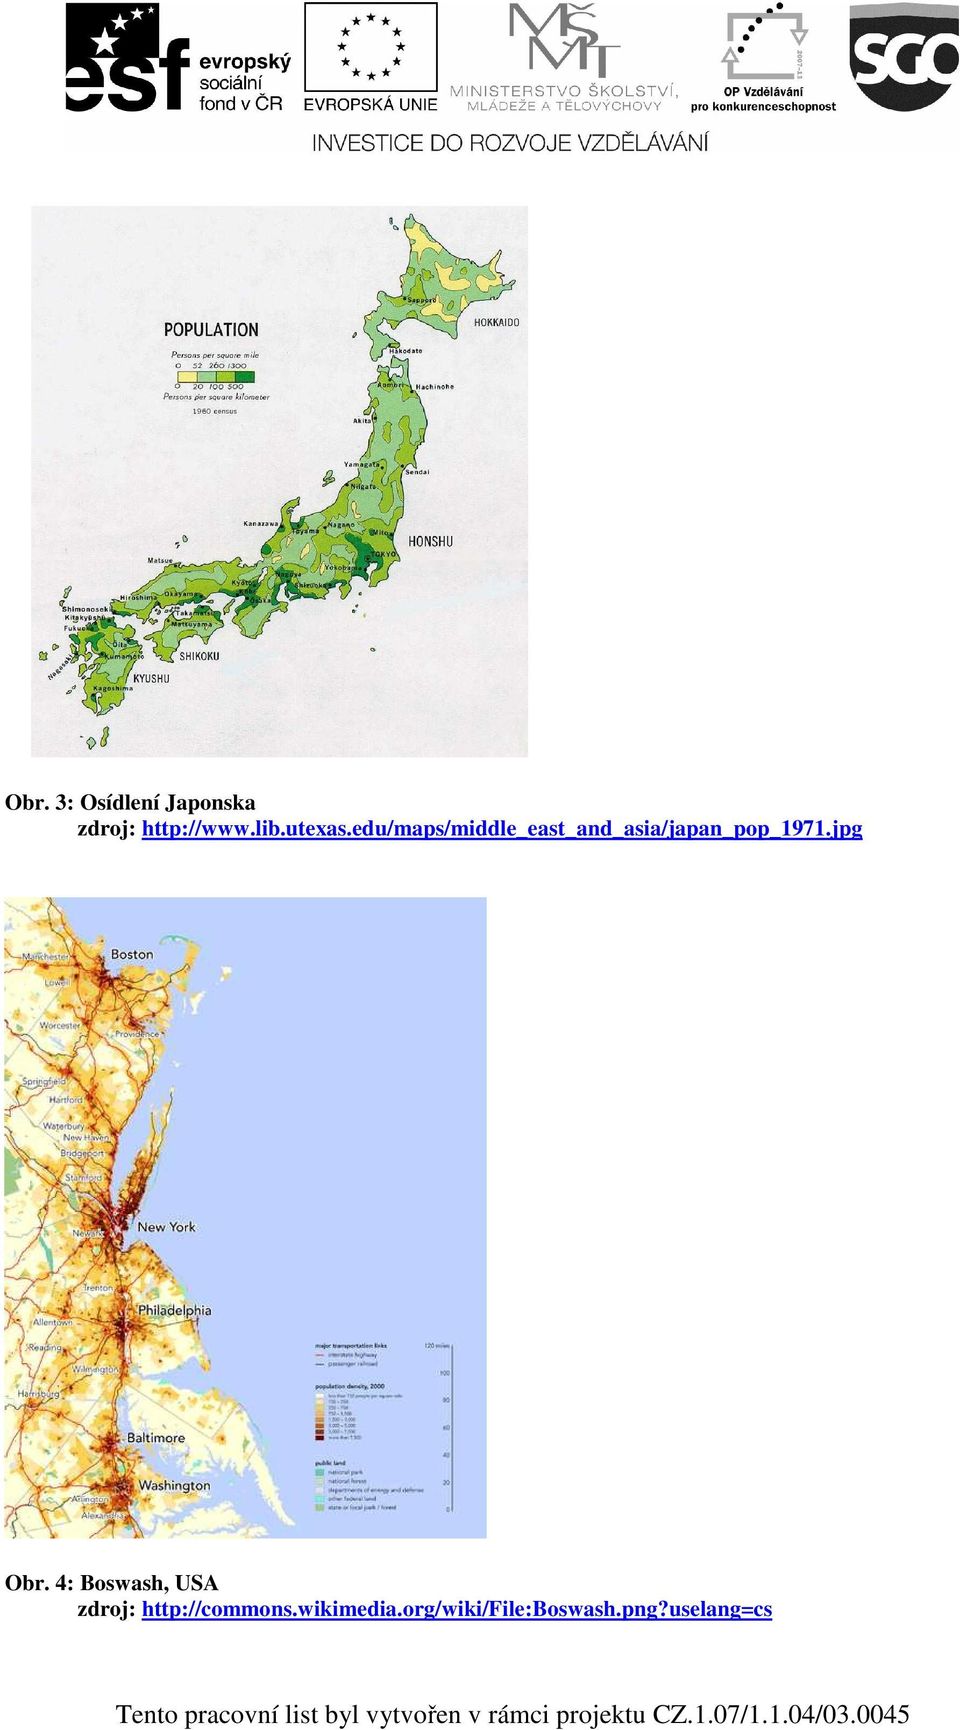 edu/maps/middle_east_and_asia/japan_pop_1971.